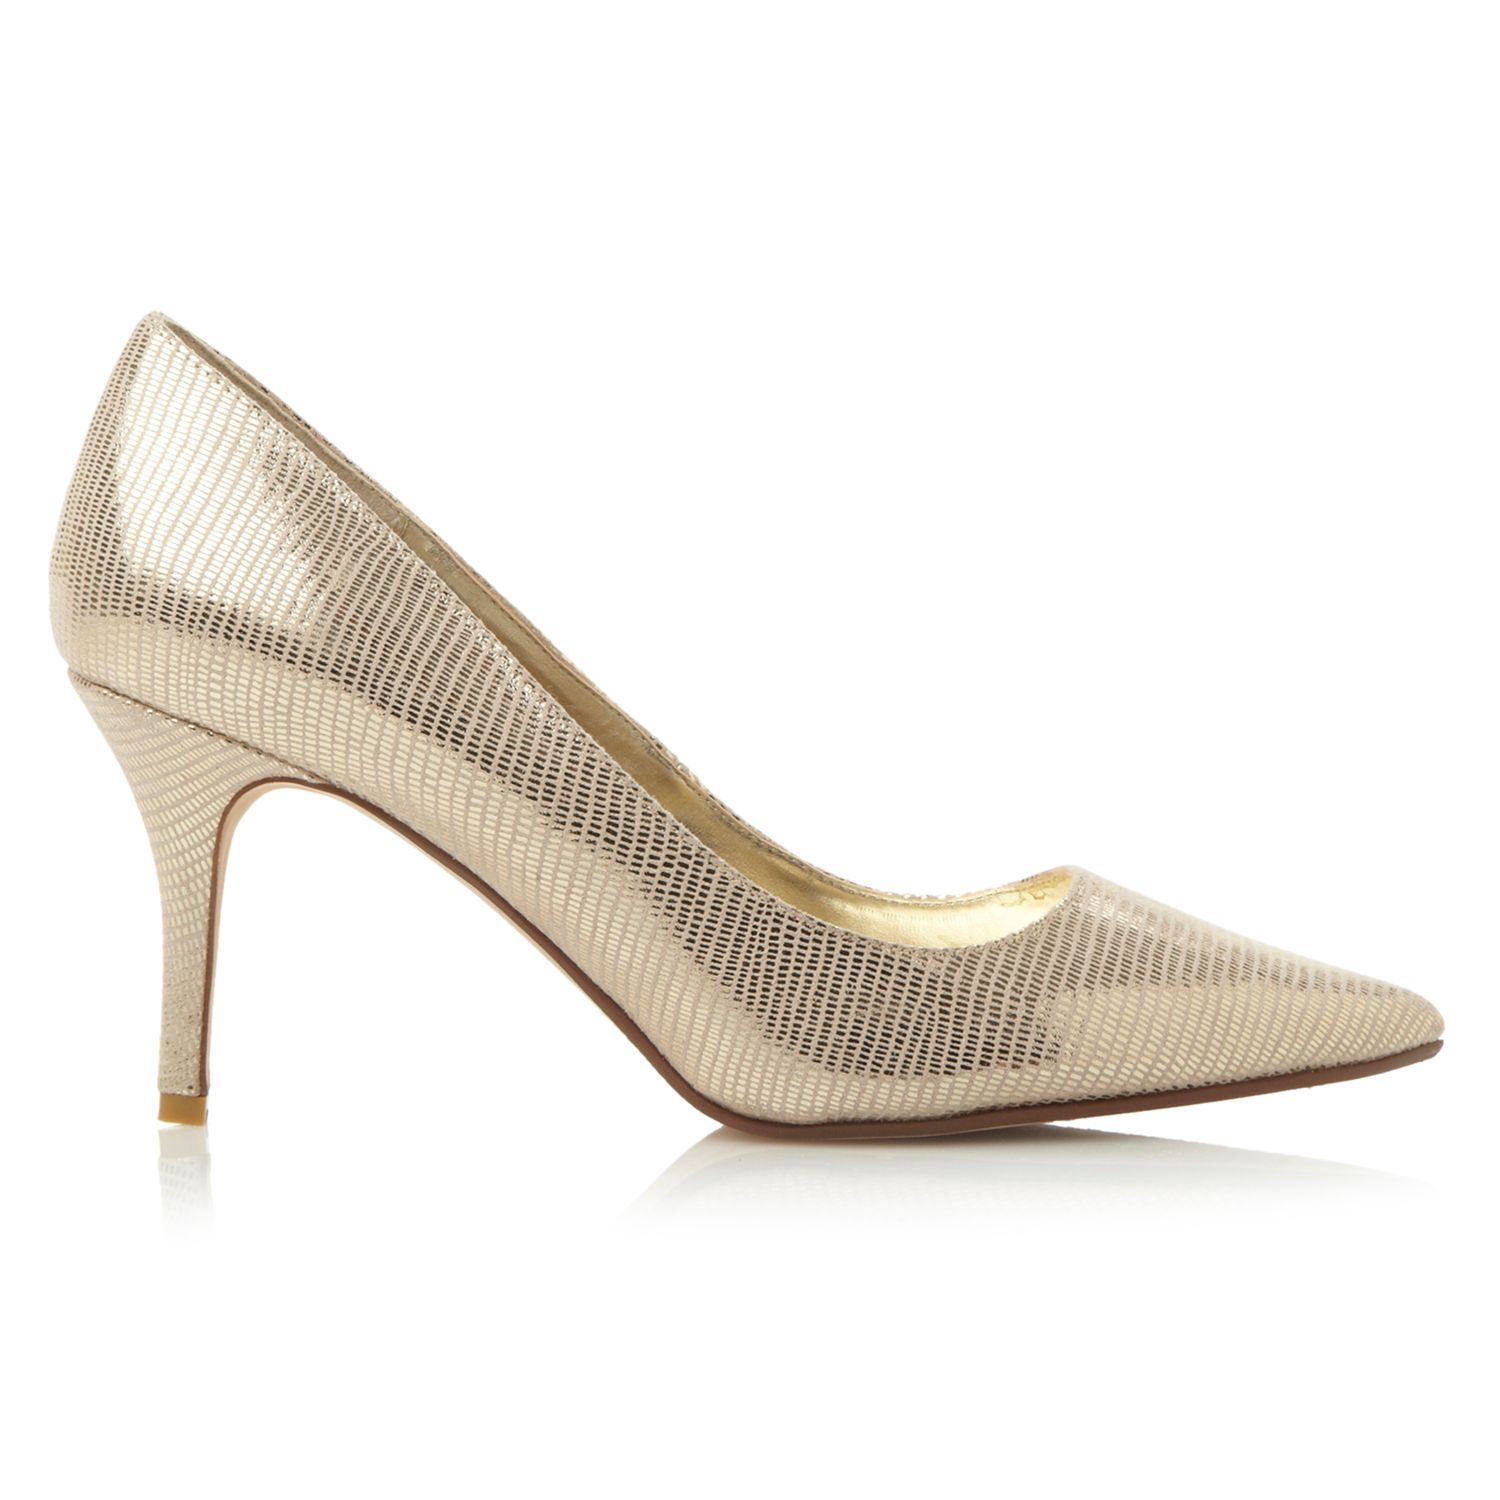 Dune Alina Pointed Toe Court Shoes, Champagne Reptile at John Lewis ...